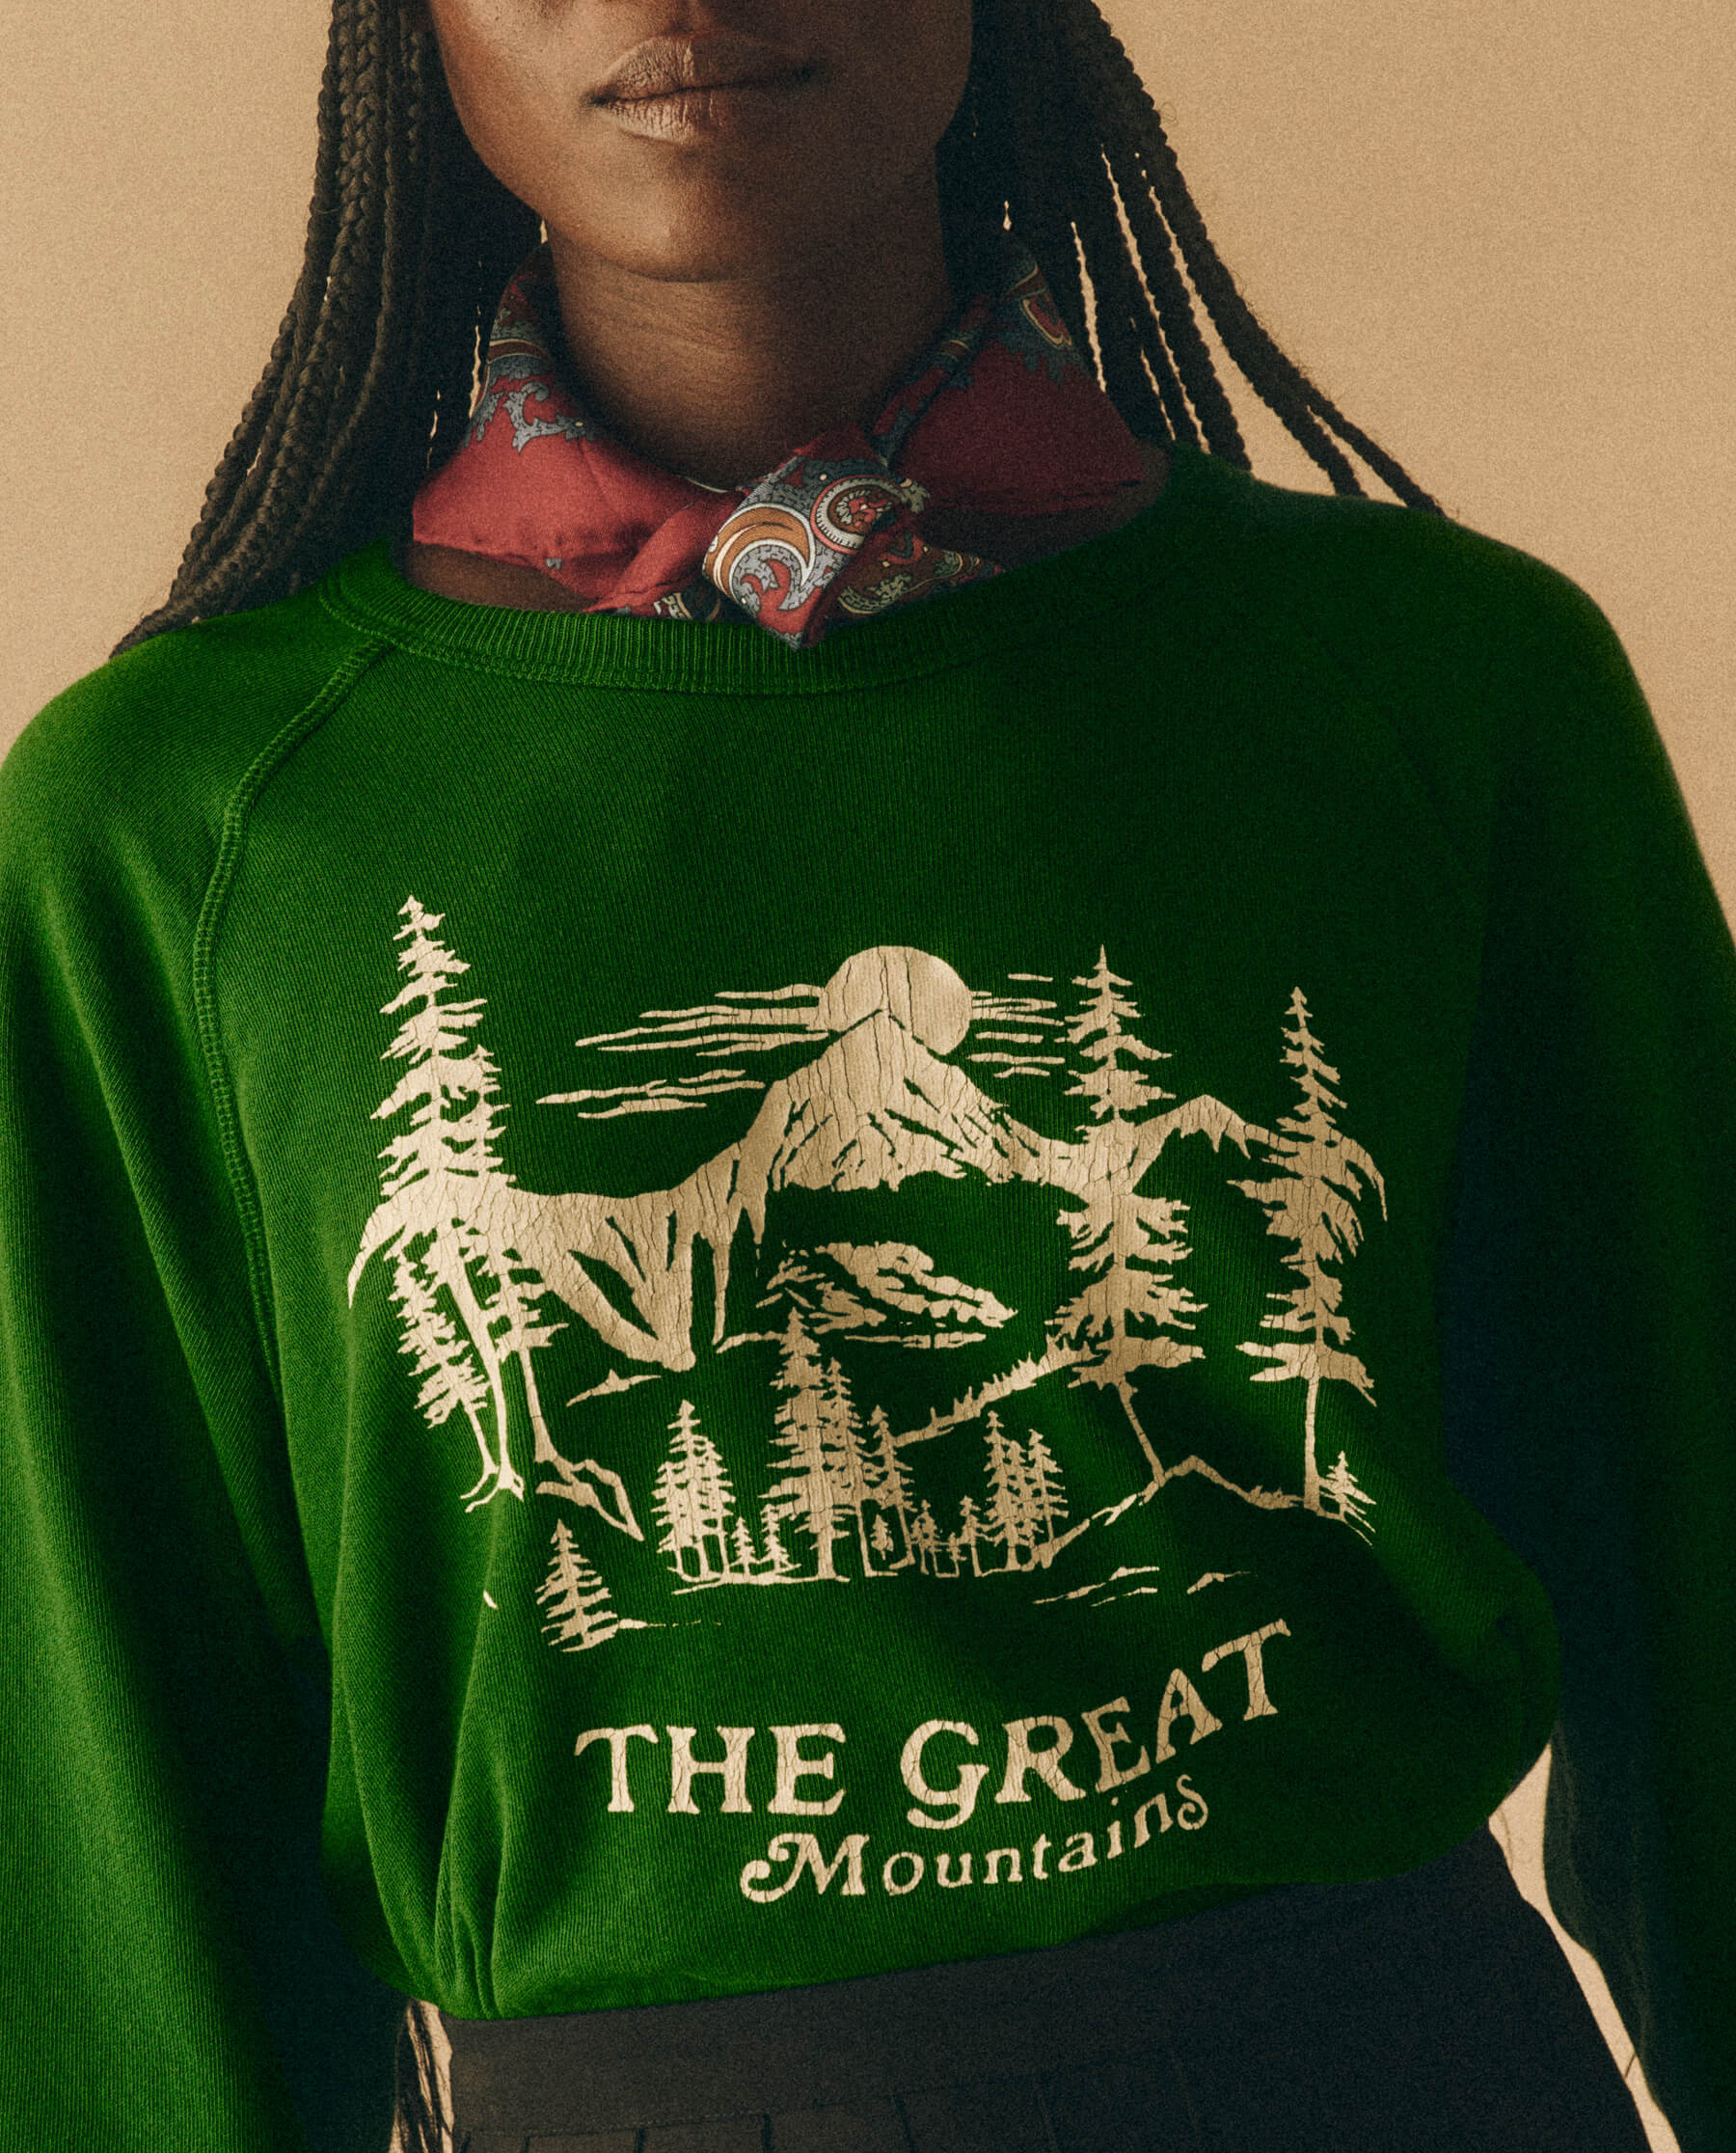 The College Sweatshirt. Graphic -- Holly Leaf with Snowdrift Graphic